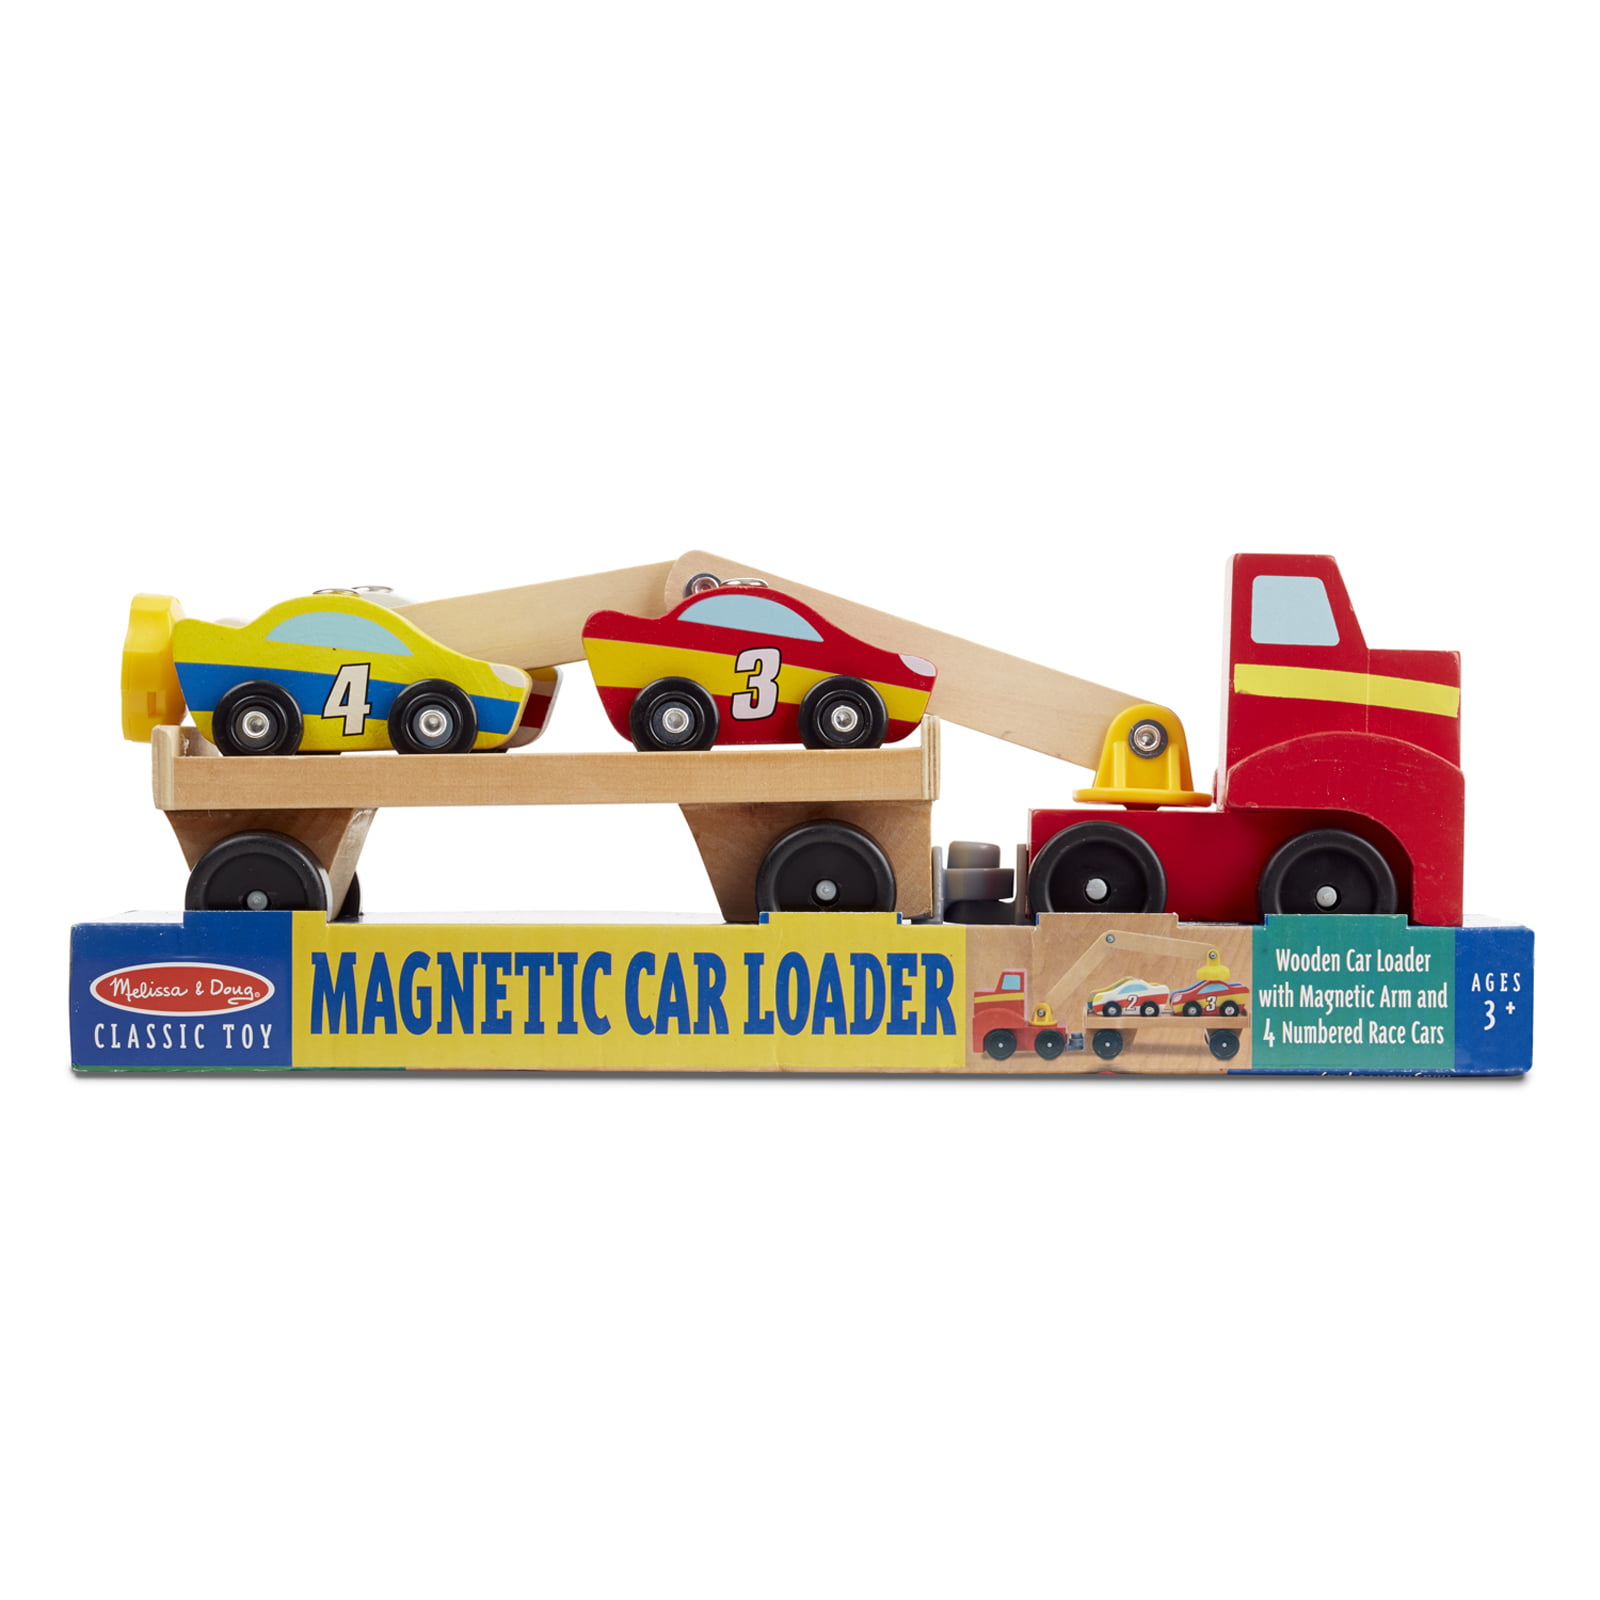 Melissa & Doug Magnetic Car Loader Wooden Toy Set with 4 Cars and 1 Semi-Trailer Truck